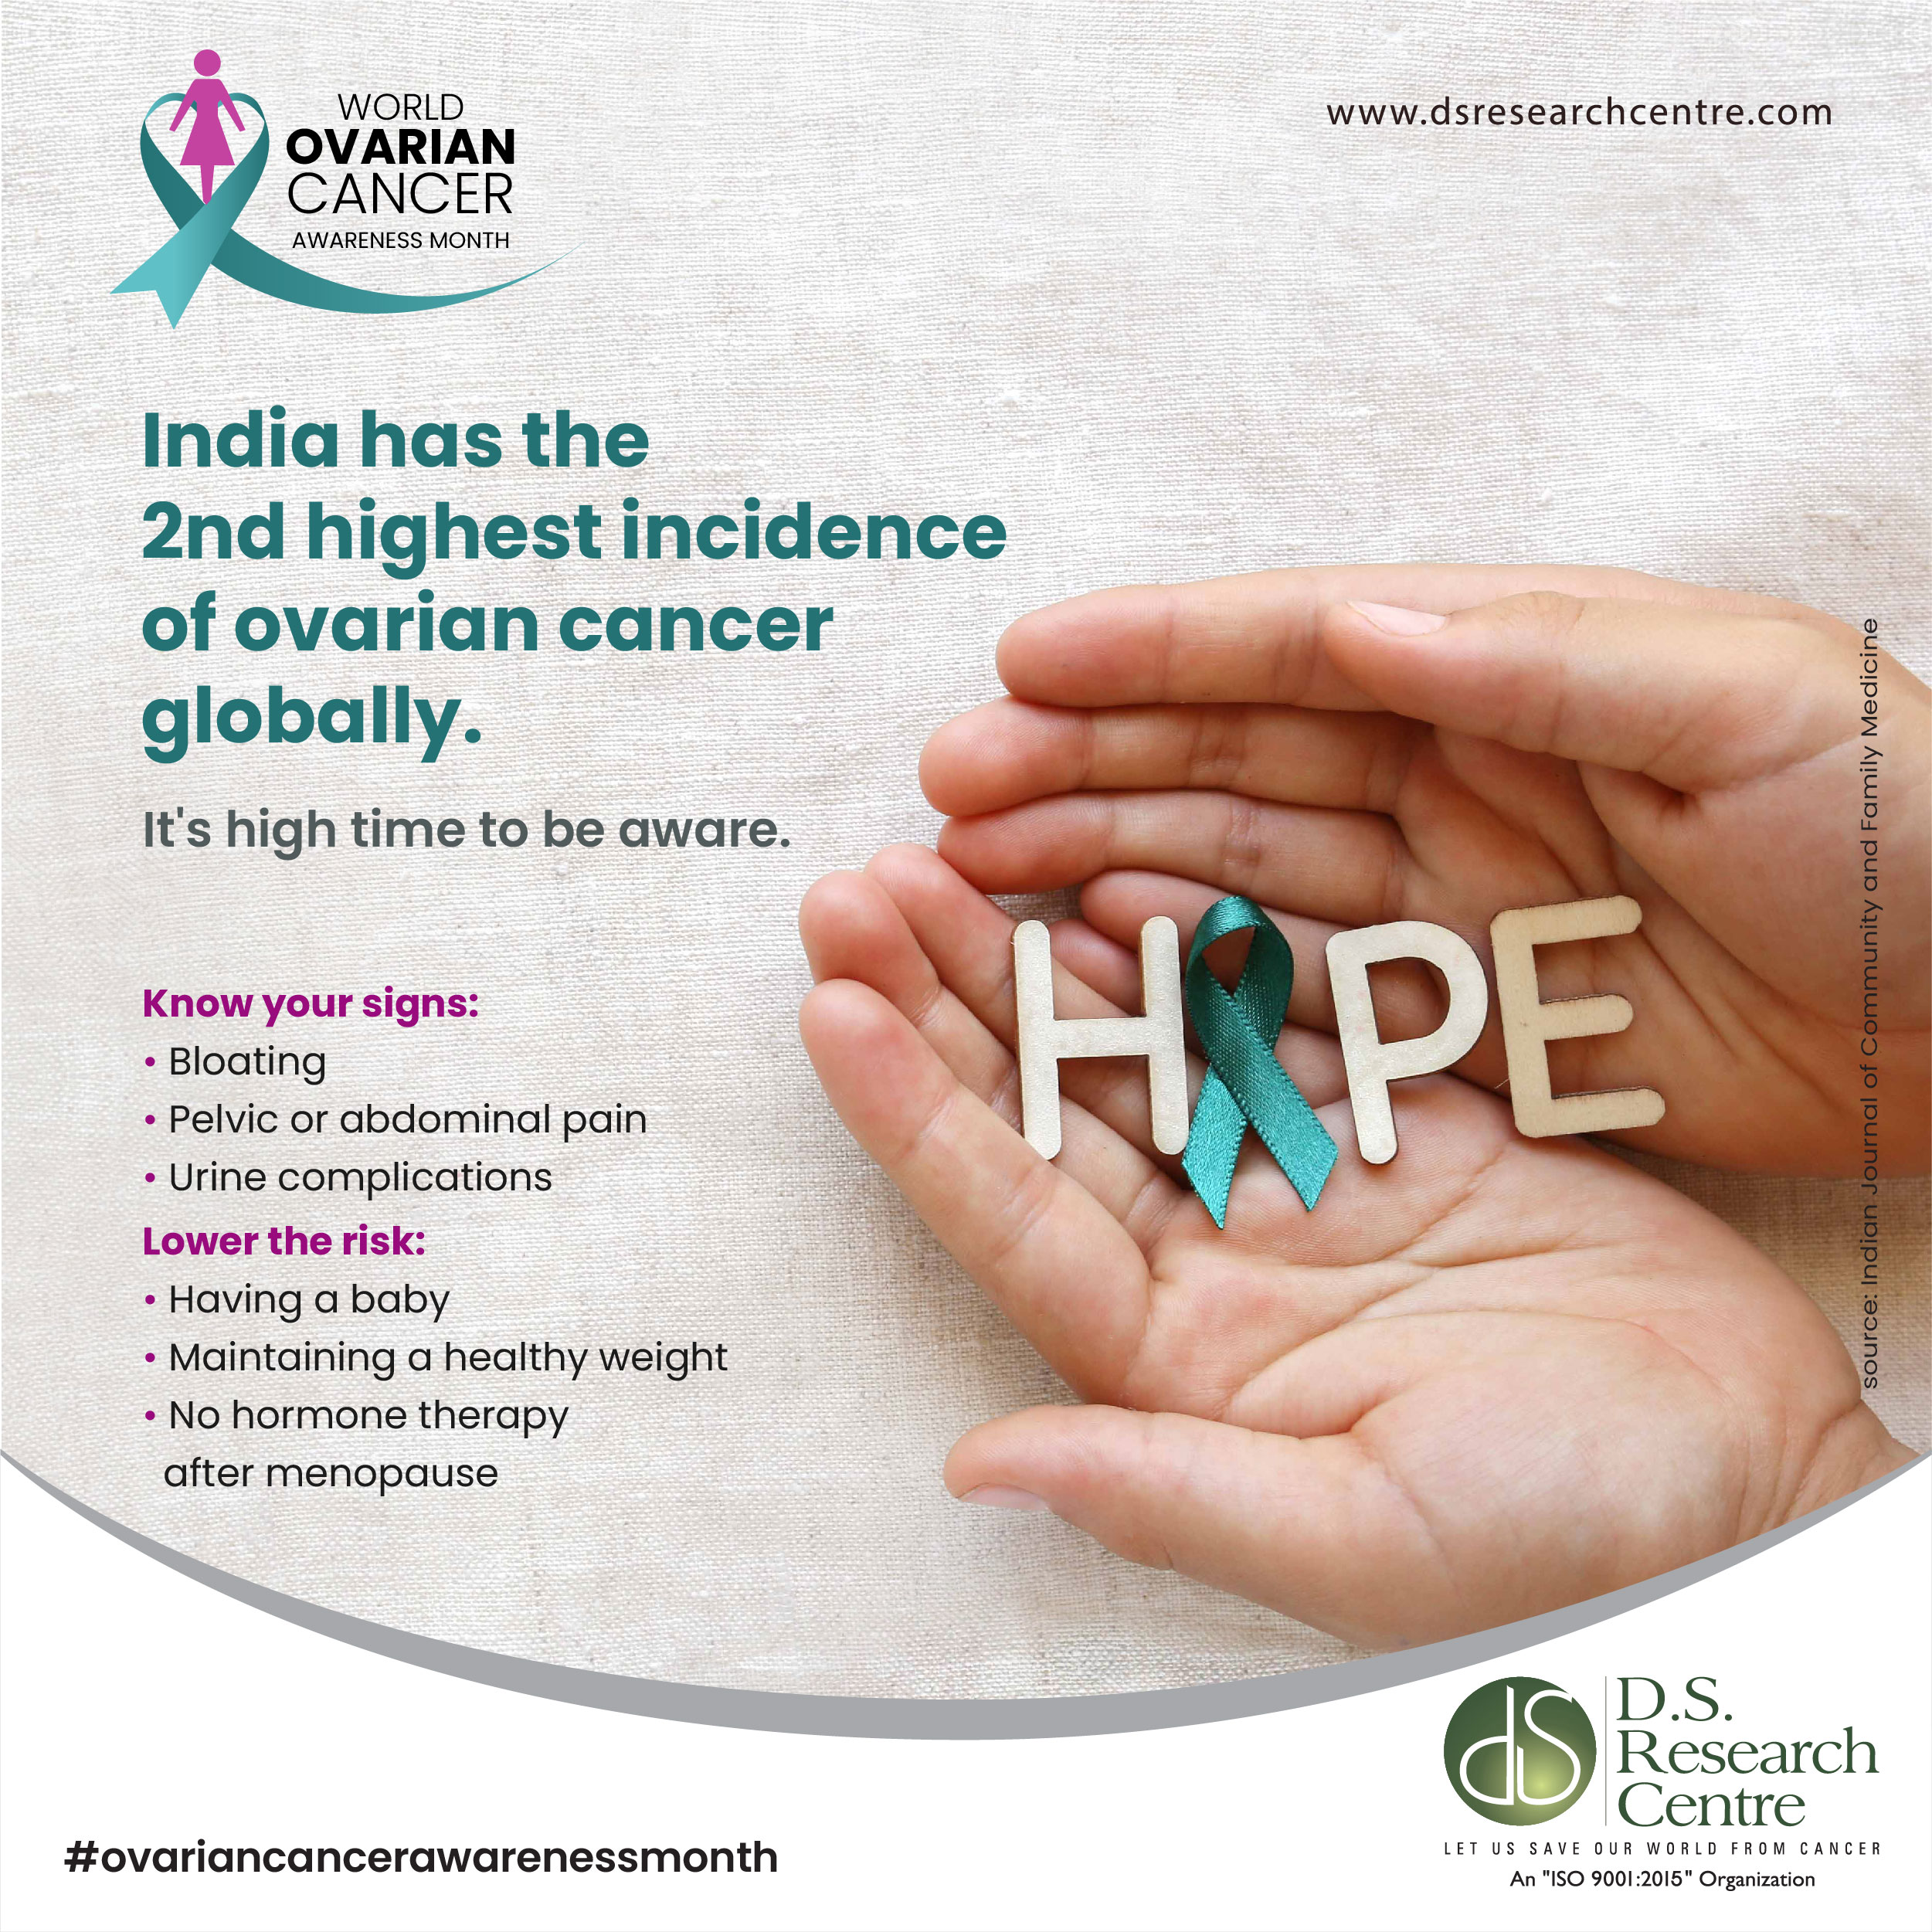 Ovarian Cancer - The second biggest killer in India